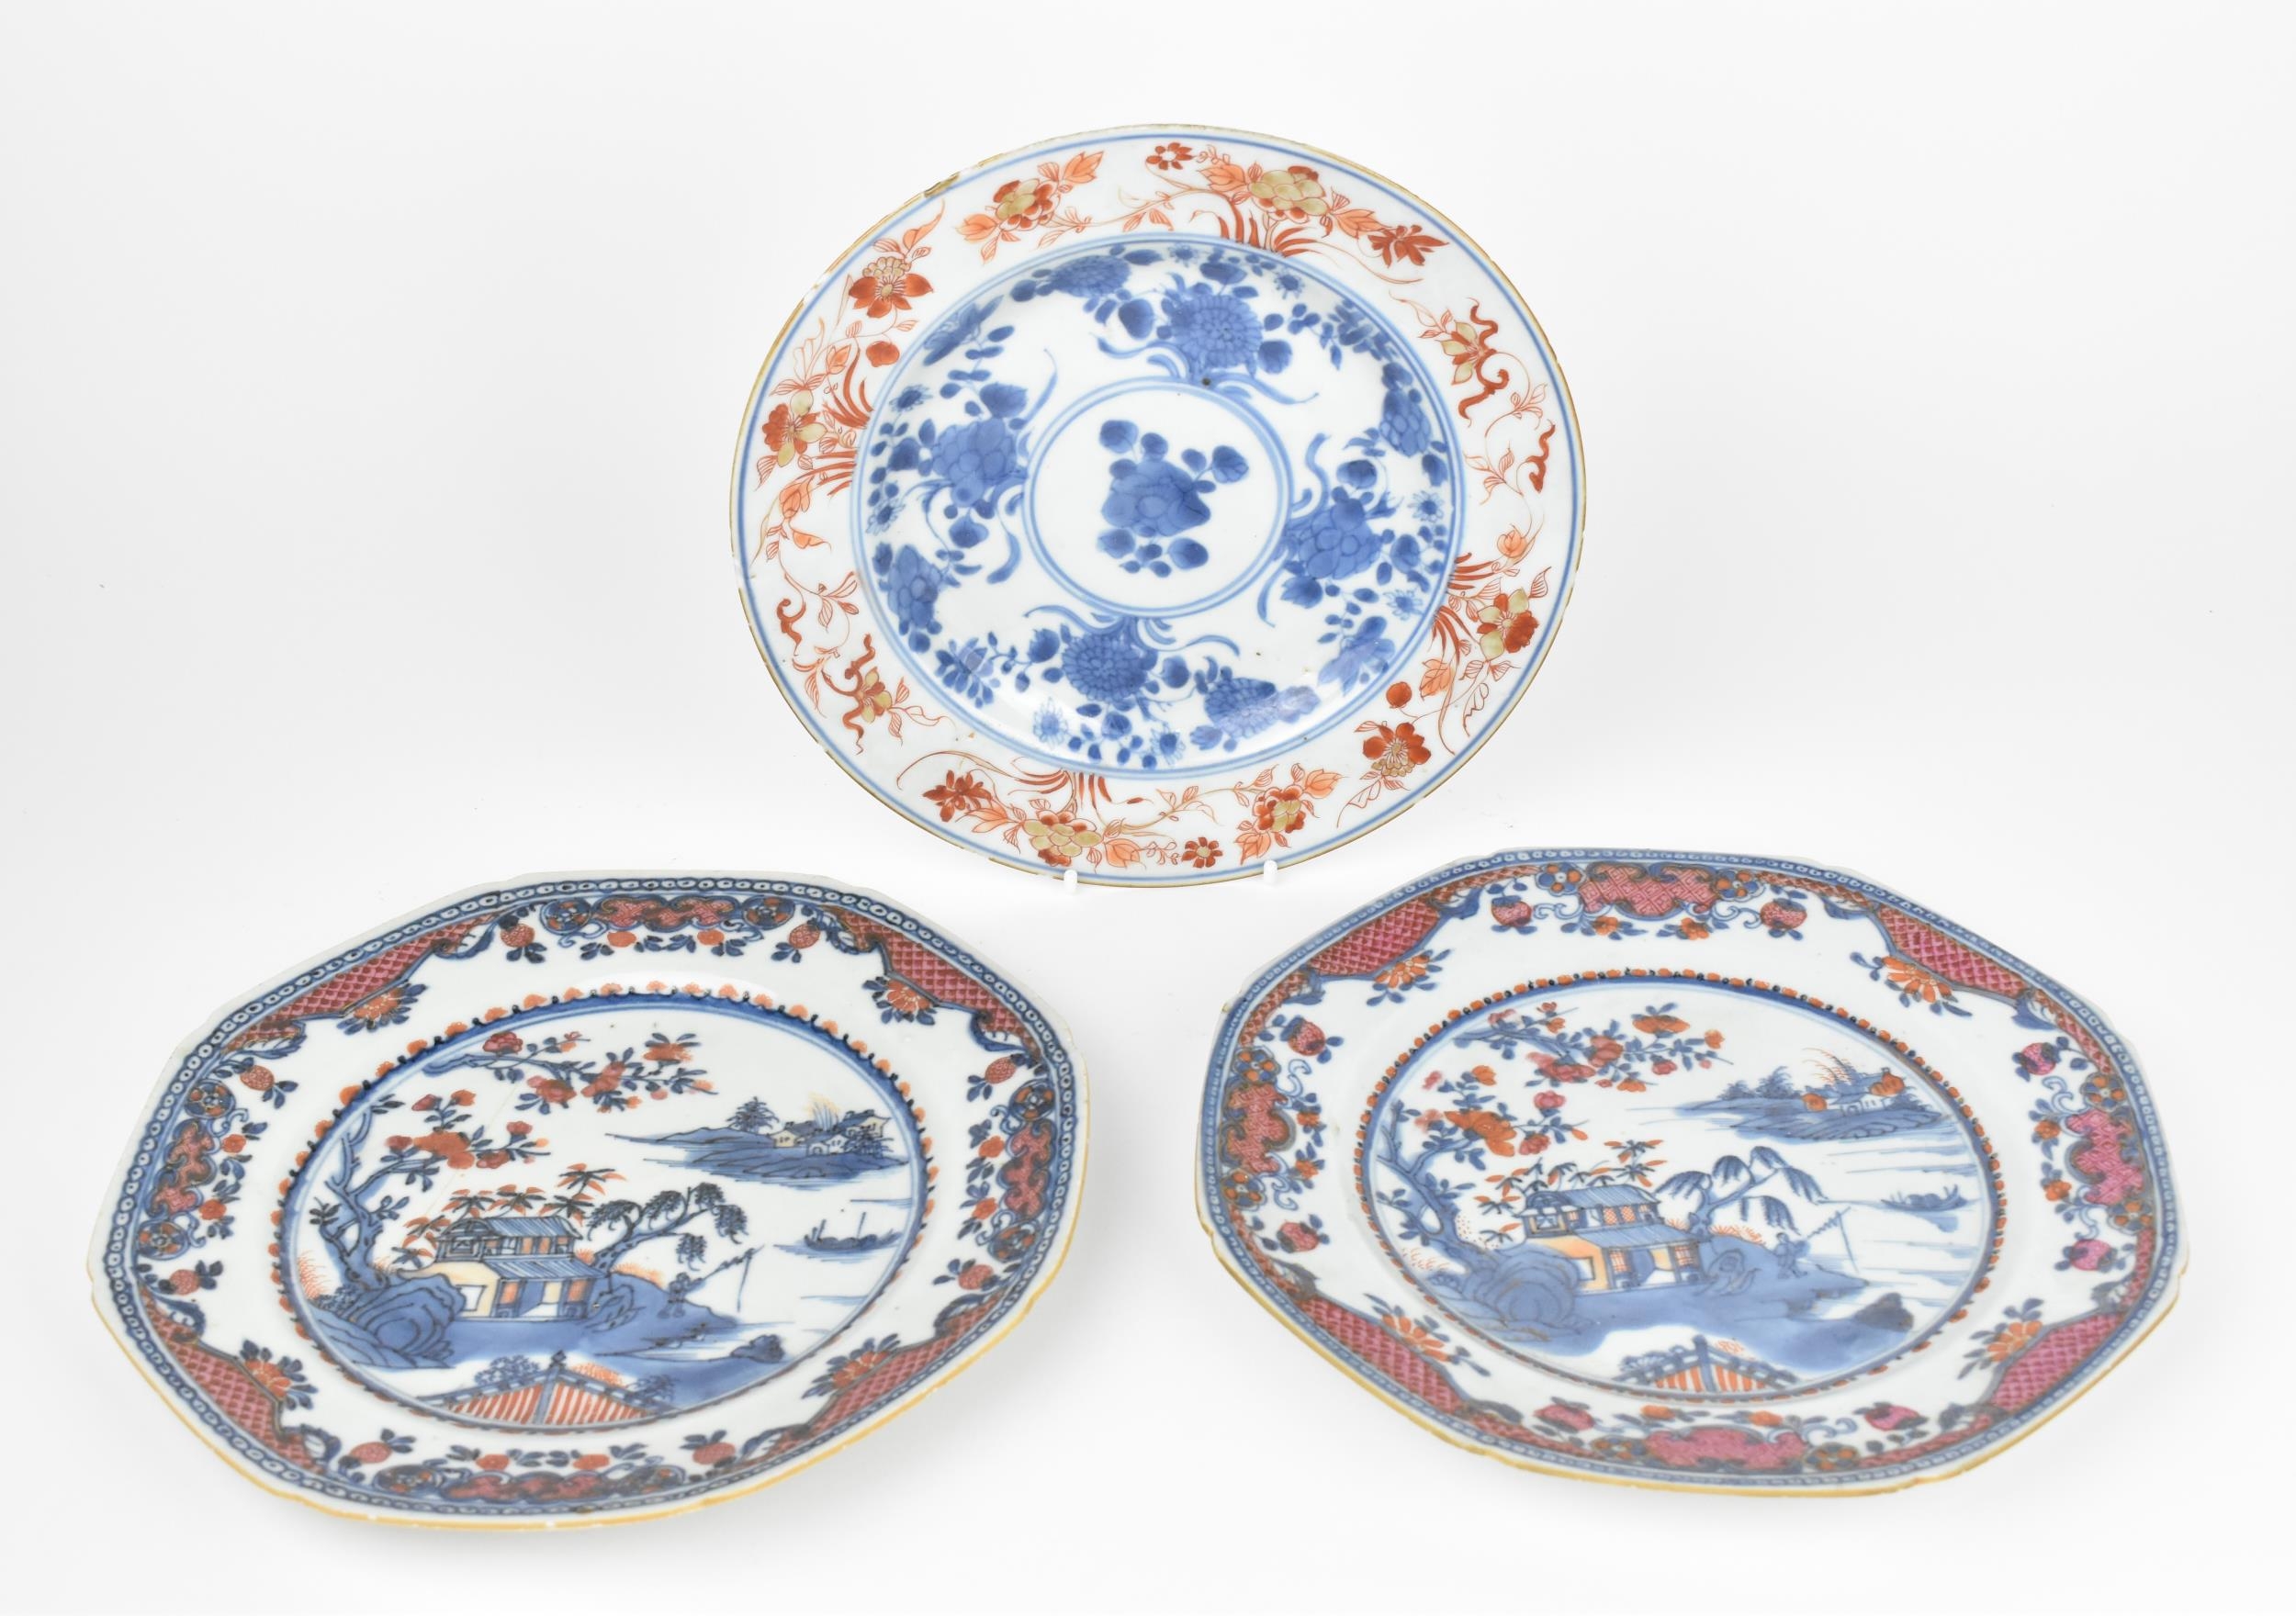 Three Chinese 18th century porcelain plates, to include two of octagonal form with willow pattern